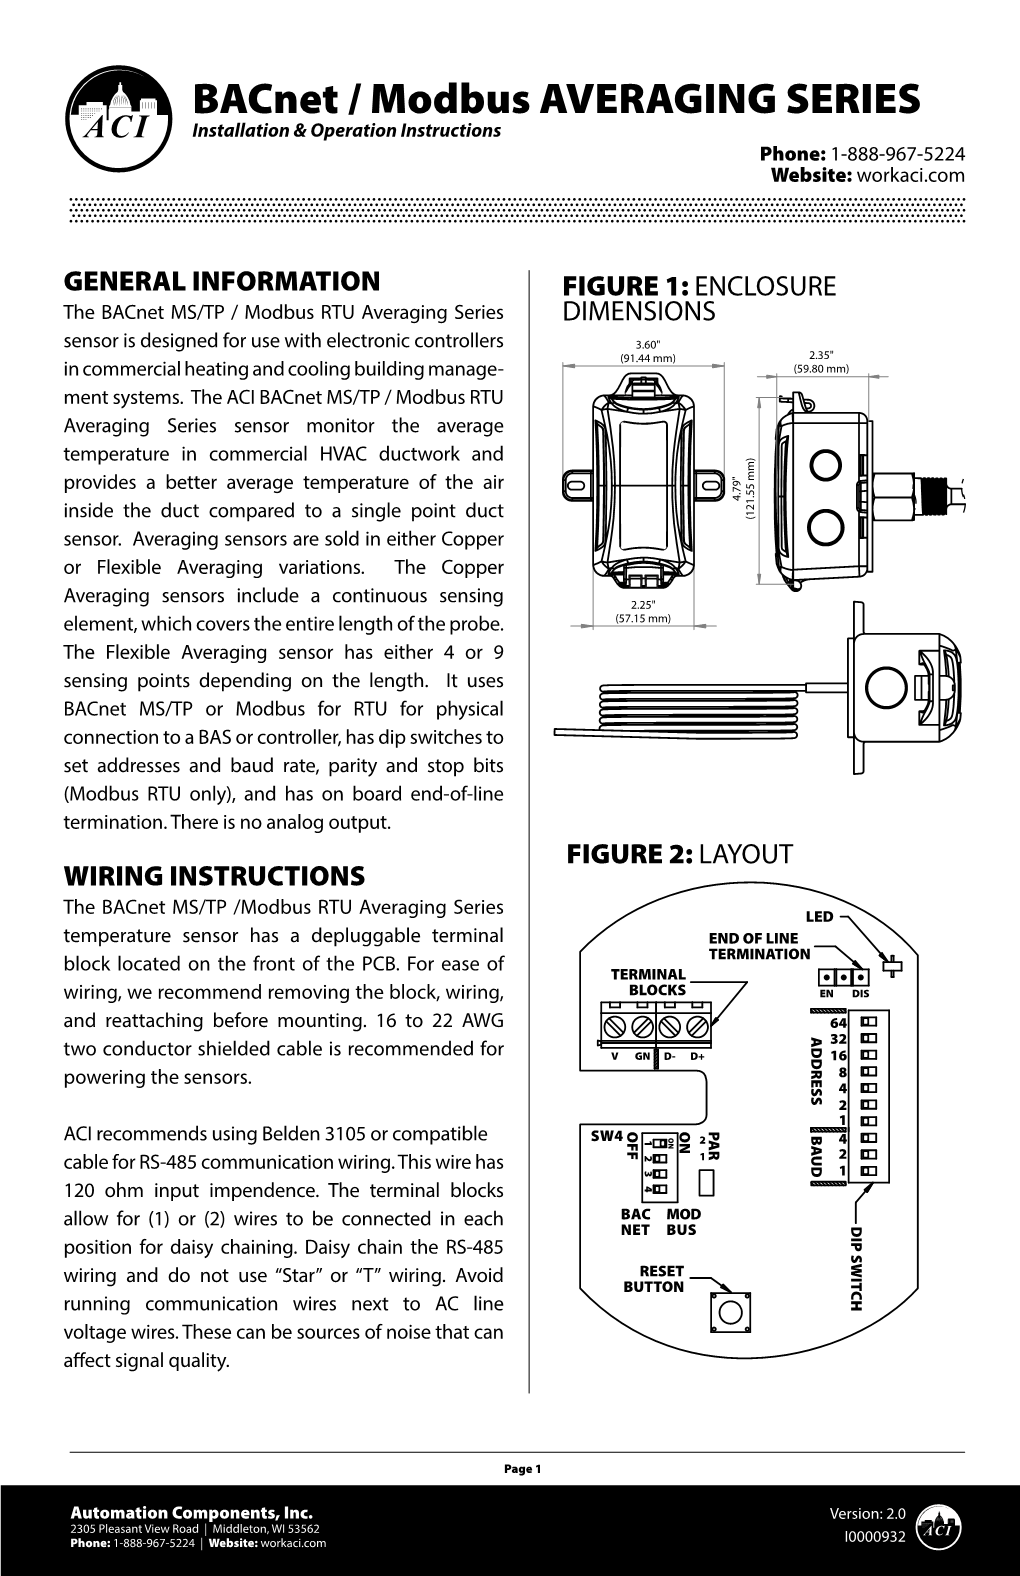 Bacnet / Modbus AVERAGING SERIES • Remove Power Before Wiring